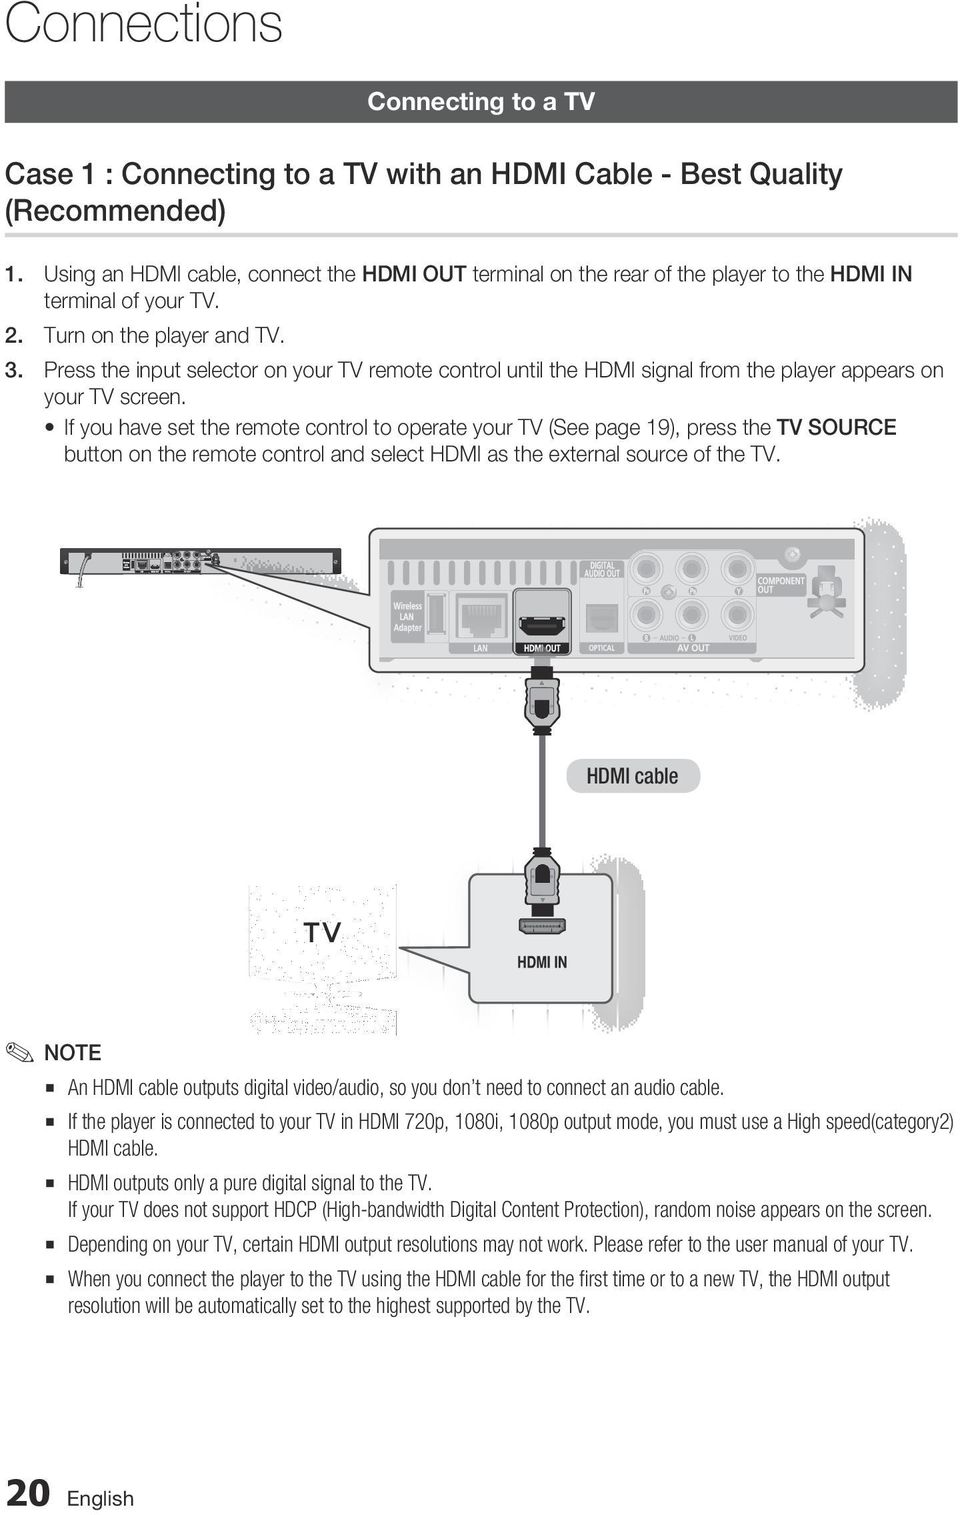 If you have set the remote control to operate your TV (See page 19), press the TV SOURCE button on the remote control and select HDMI as the external source of the TV.